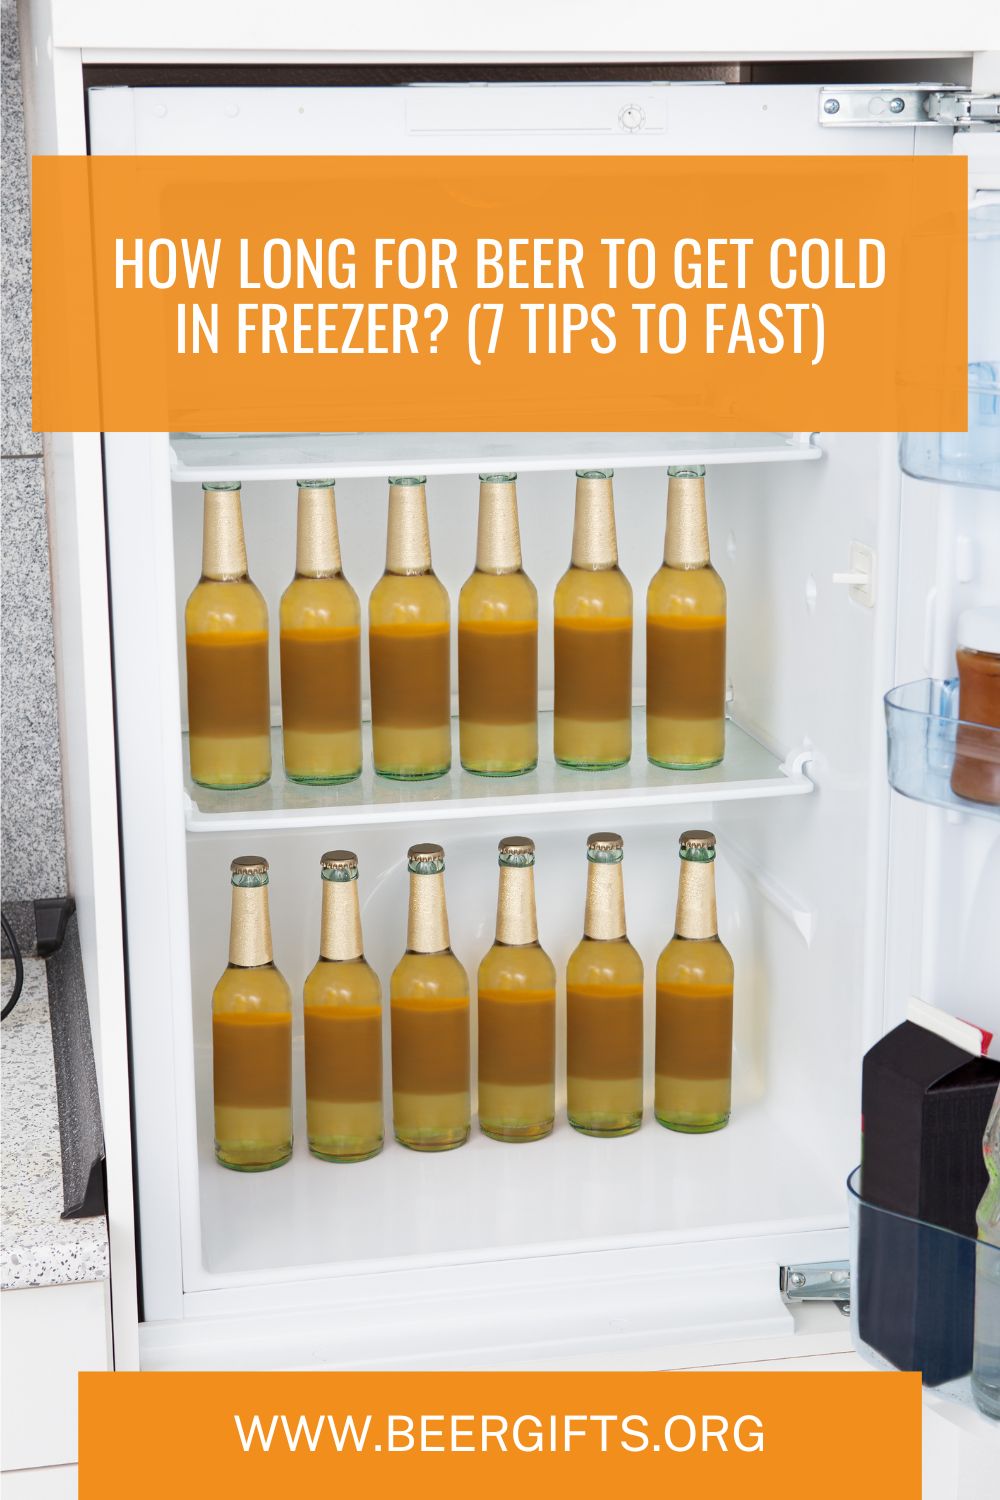 How Long for Beer to get Cold in Freezer 7